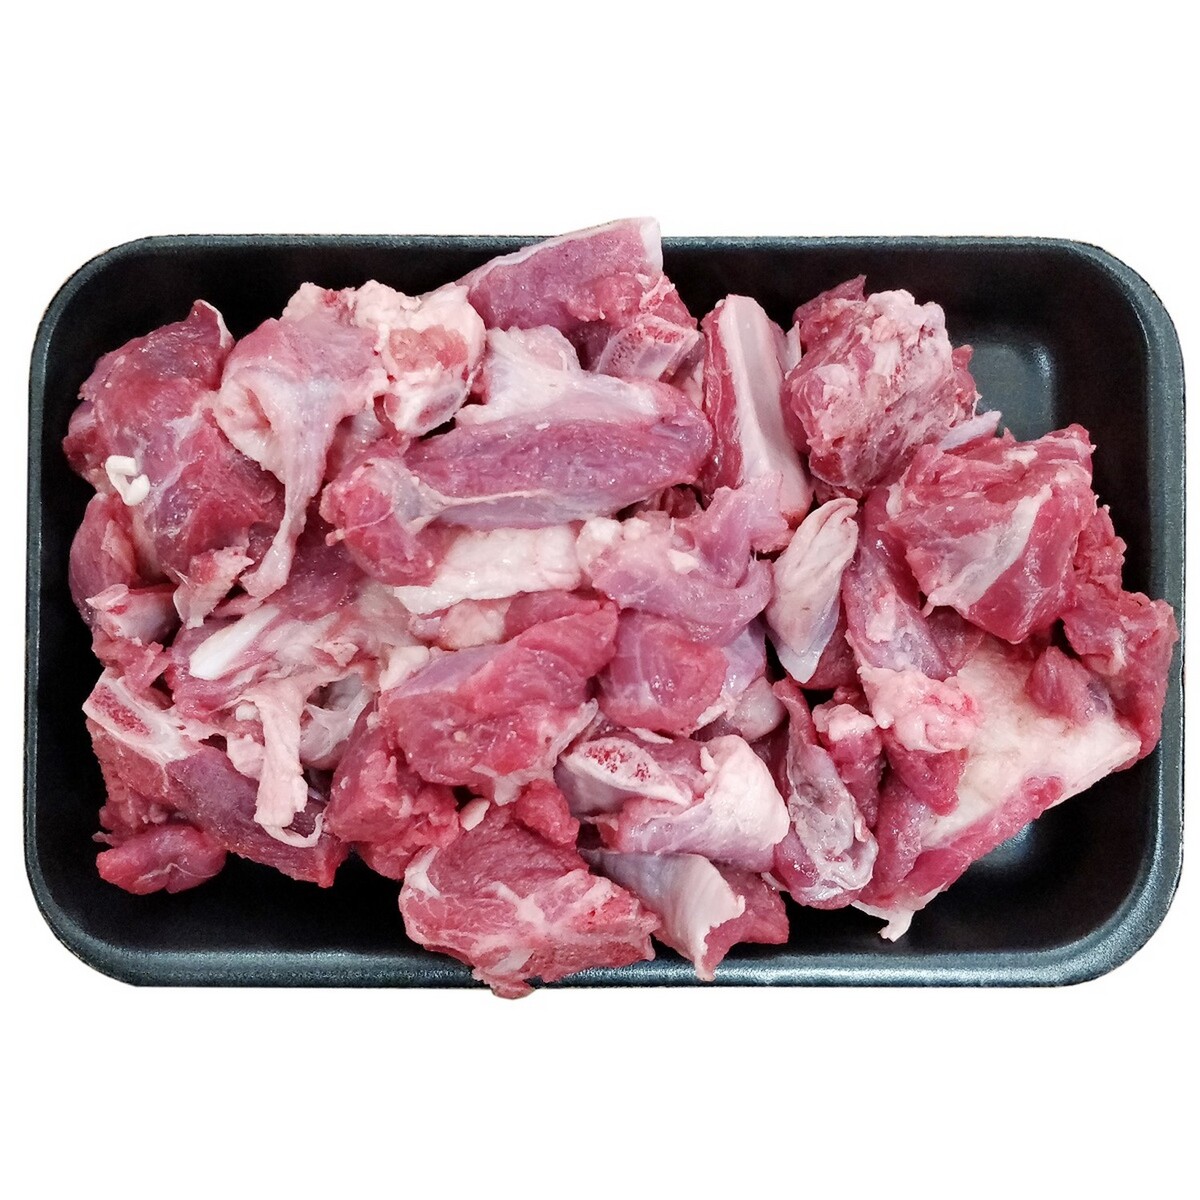 Mutton Curry Cuts Meat Approx. 1Kg